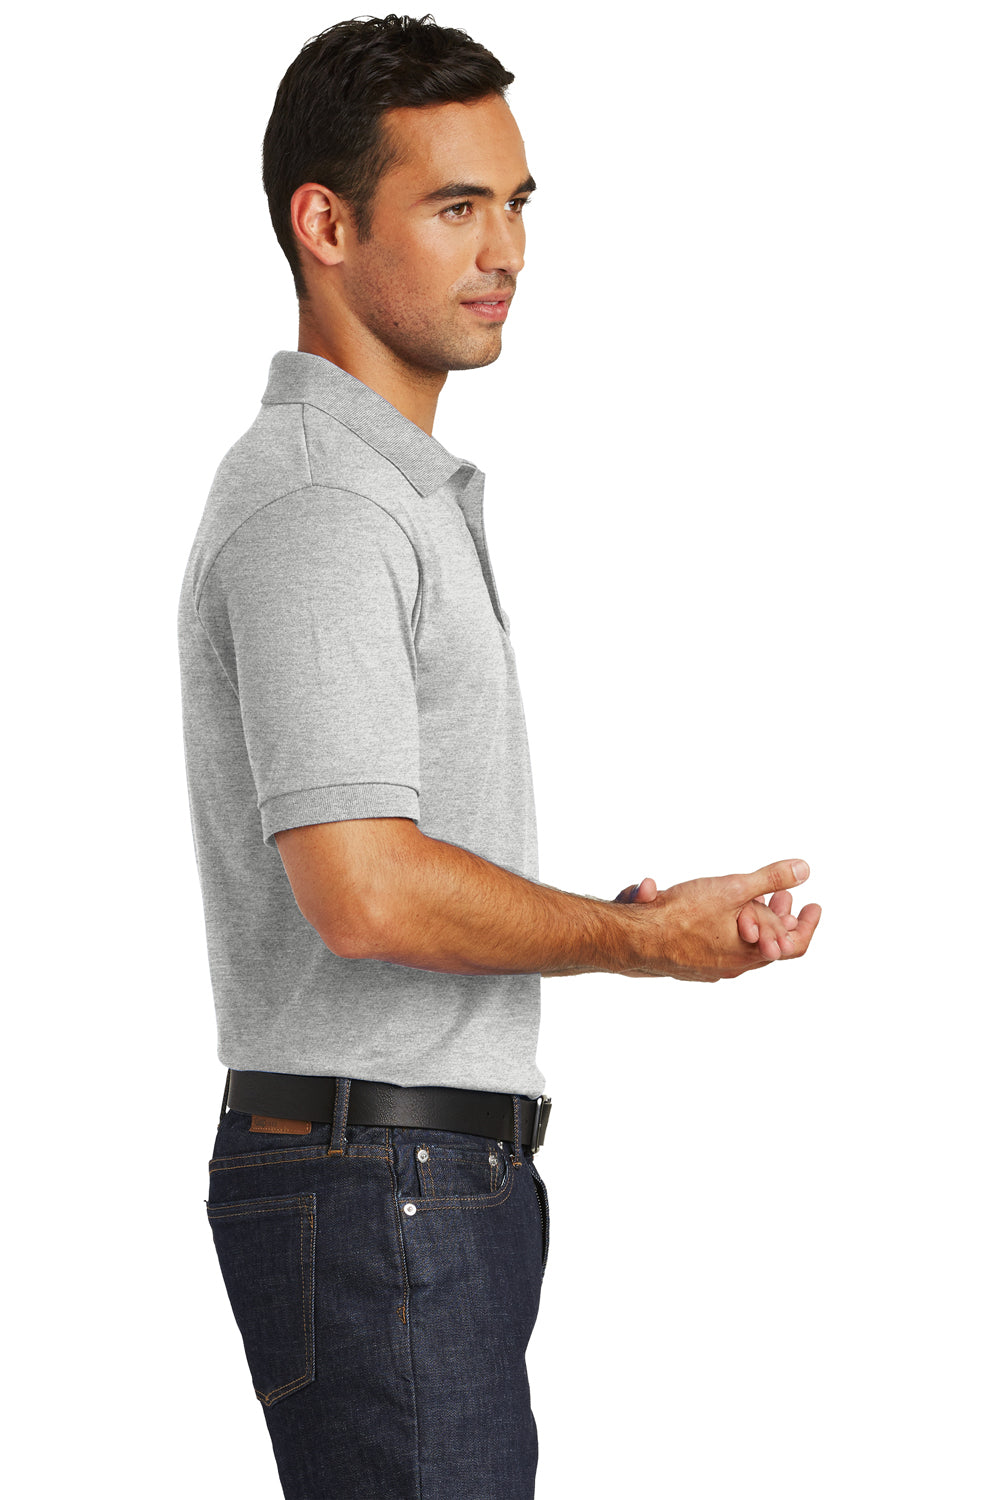 Port & Company KP55P Mens Core Stain Resistant Short Sleeve Polo Shirt w/ Pocket Ash Grey Side